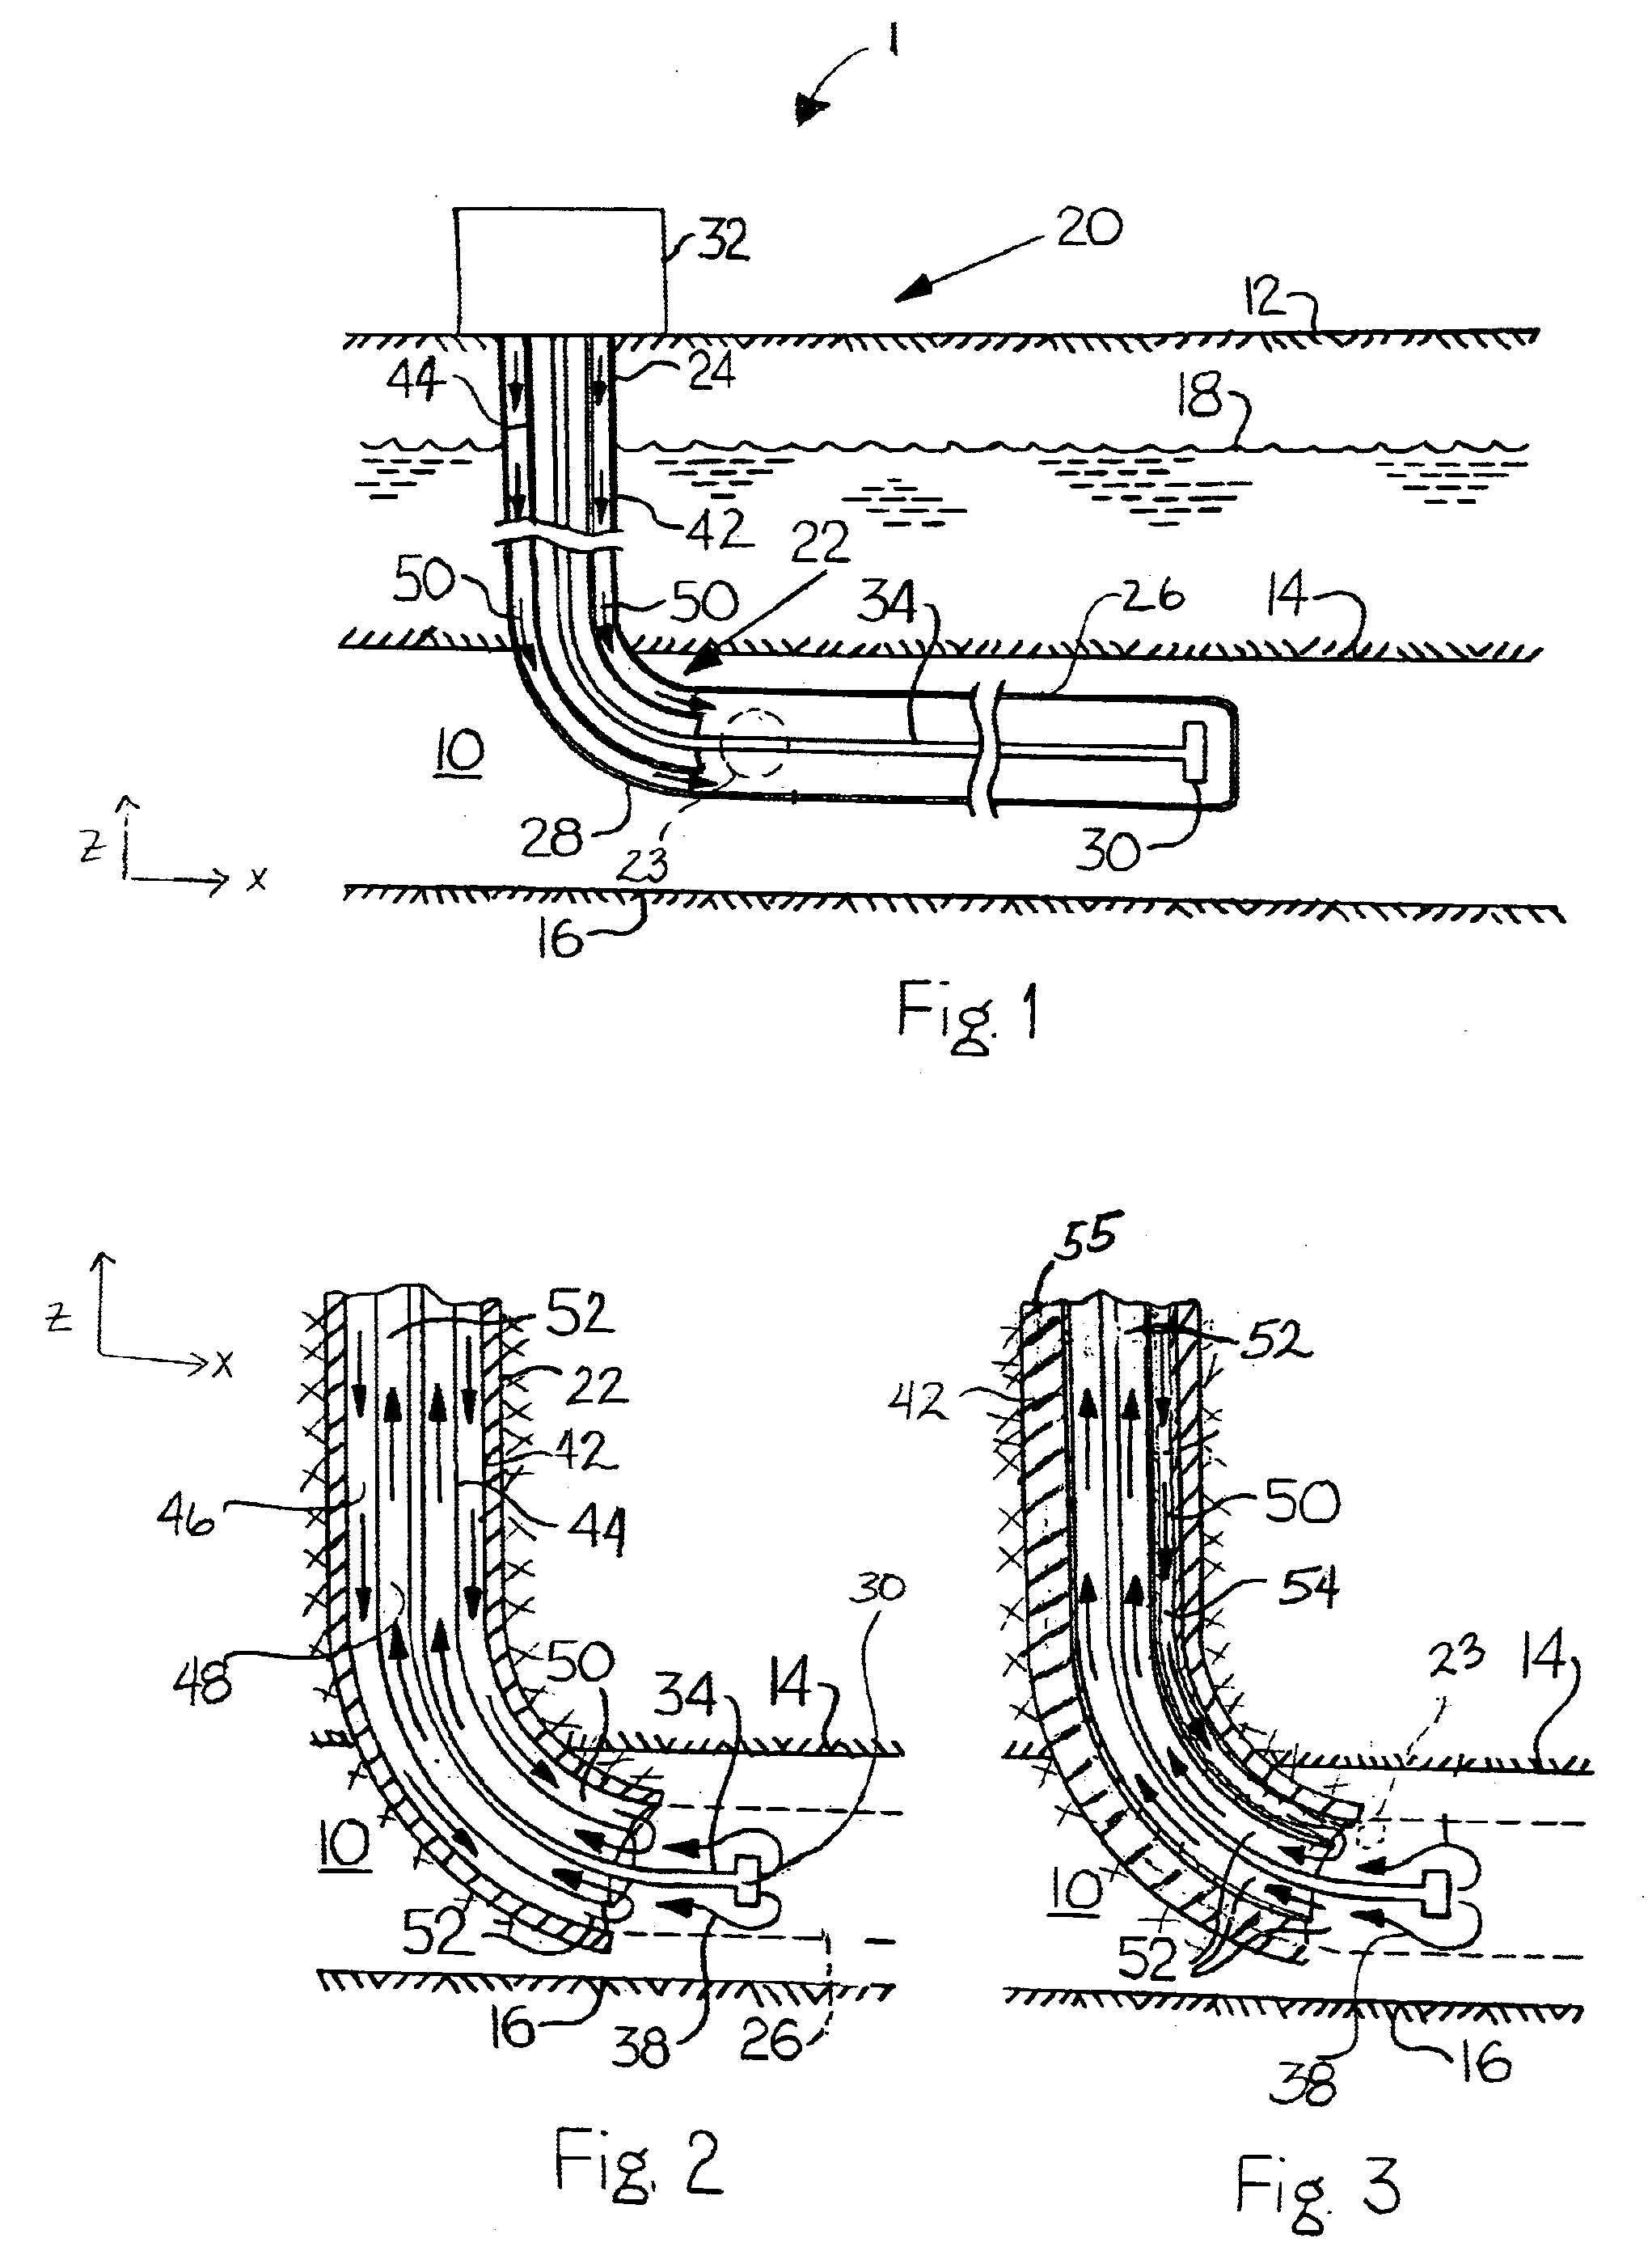 Method and system for production of gas and water from a gas bearing strata during drilling and after drilling completion